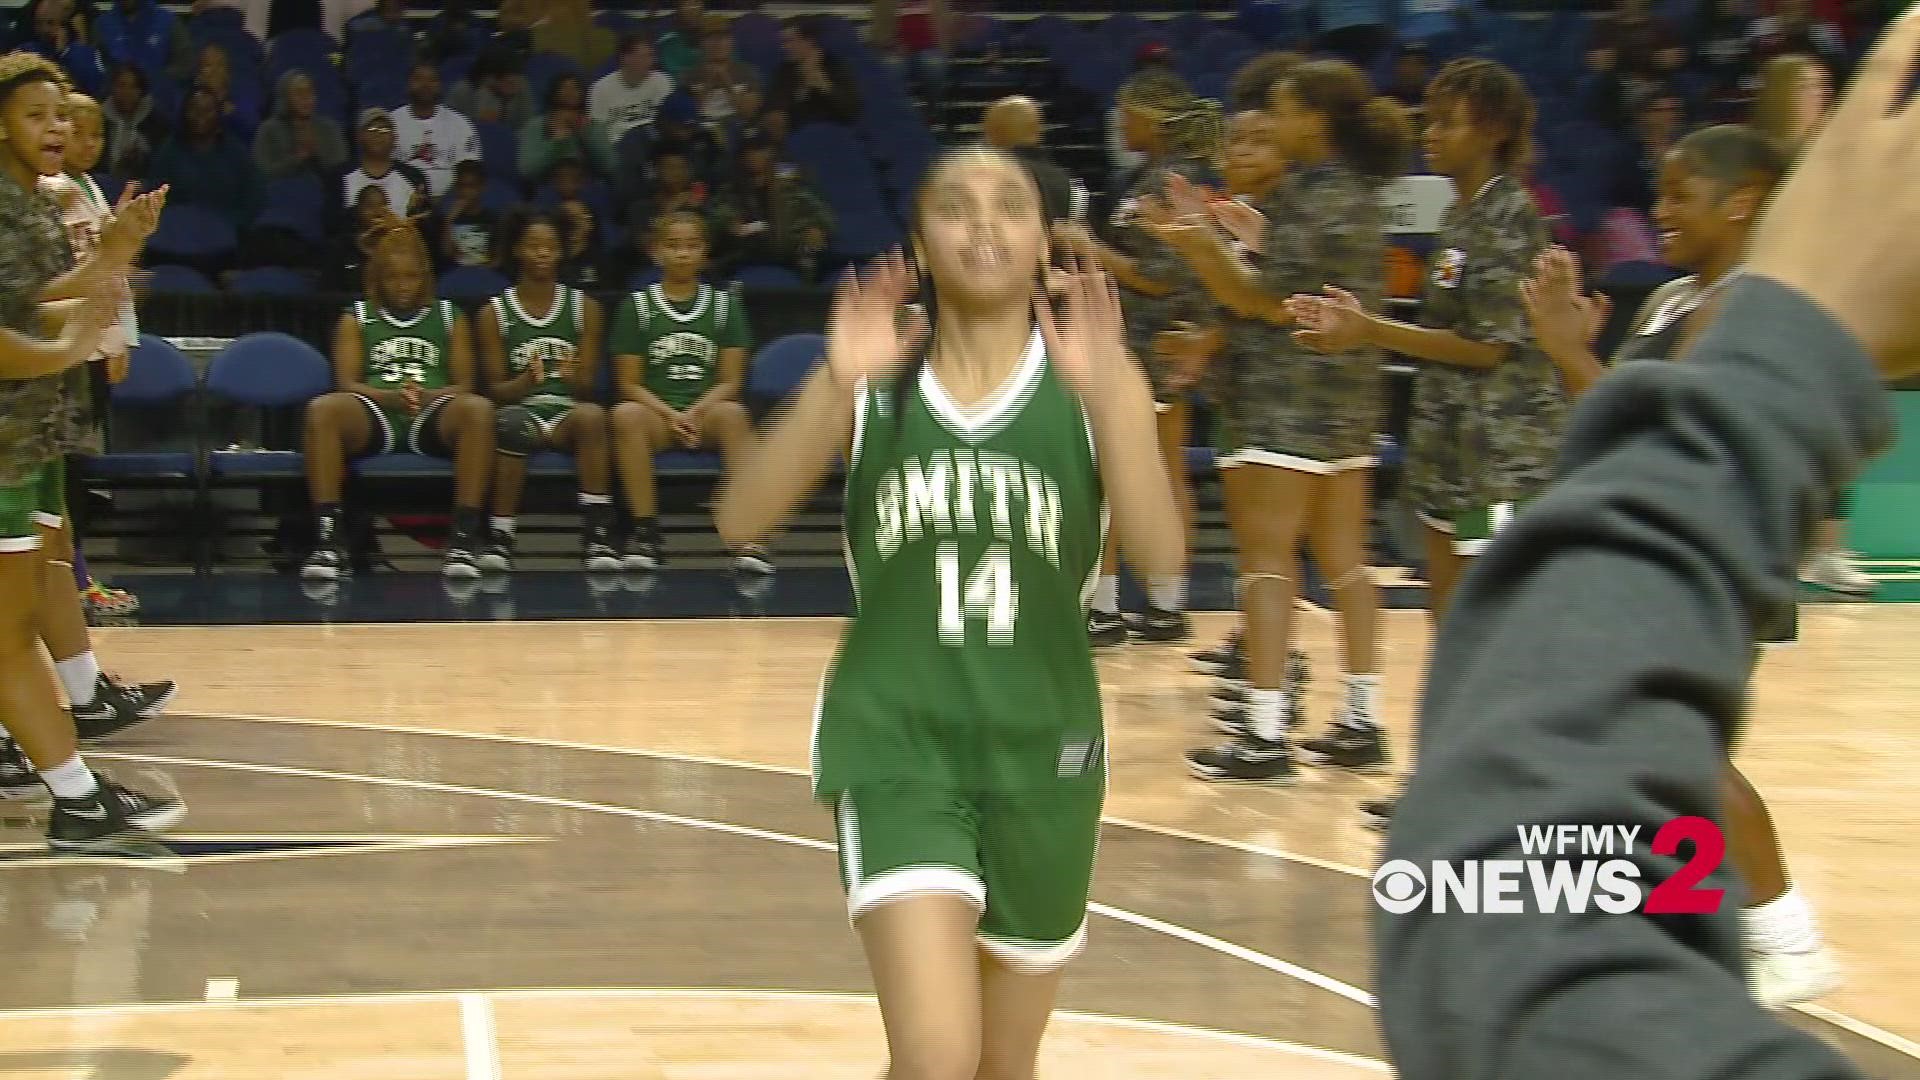 Adelaide Jernigan scored a game-high 19 points as Bishop McGuinness gets the 45-39 win.